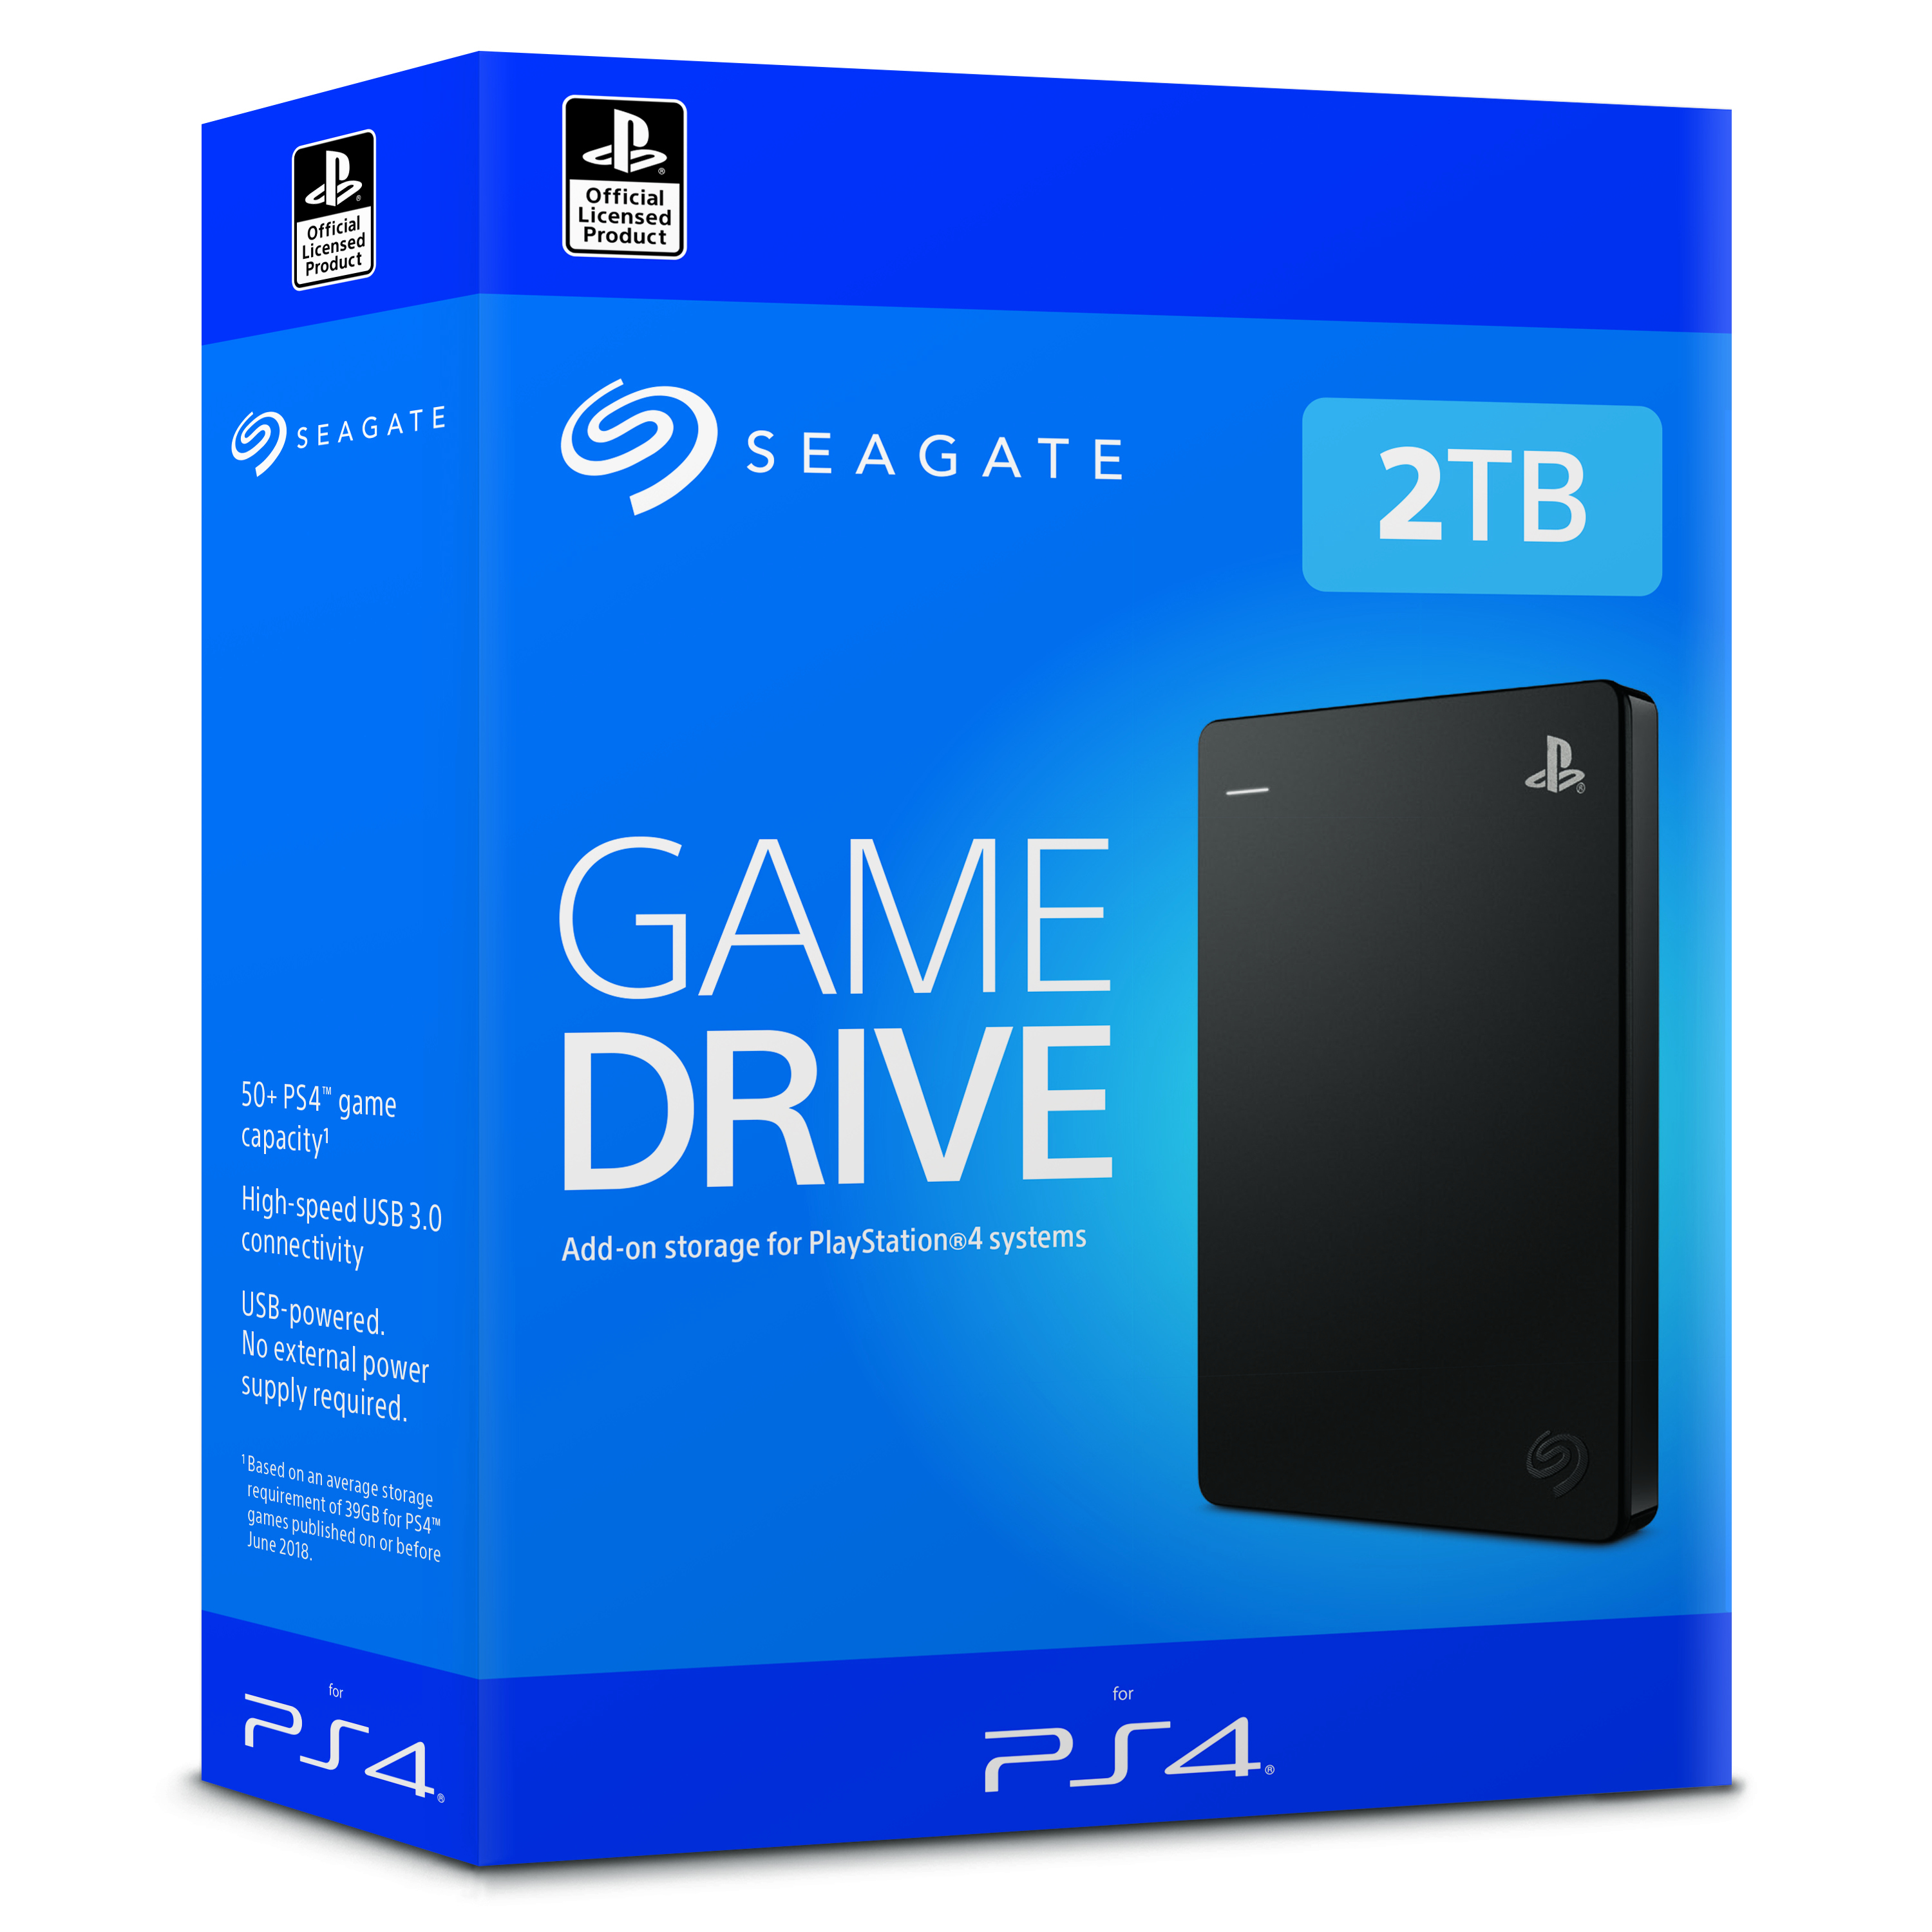 Game STGD2000200 - Festplatte - for PS4 TB Drive Seagate (tragbar) Seagate STGD2000200 extern | - 2